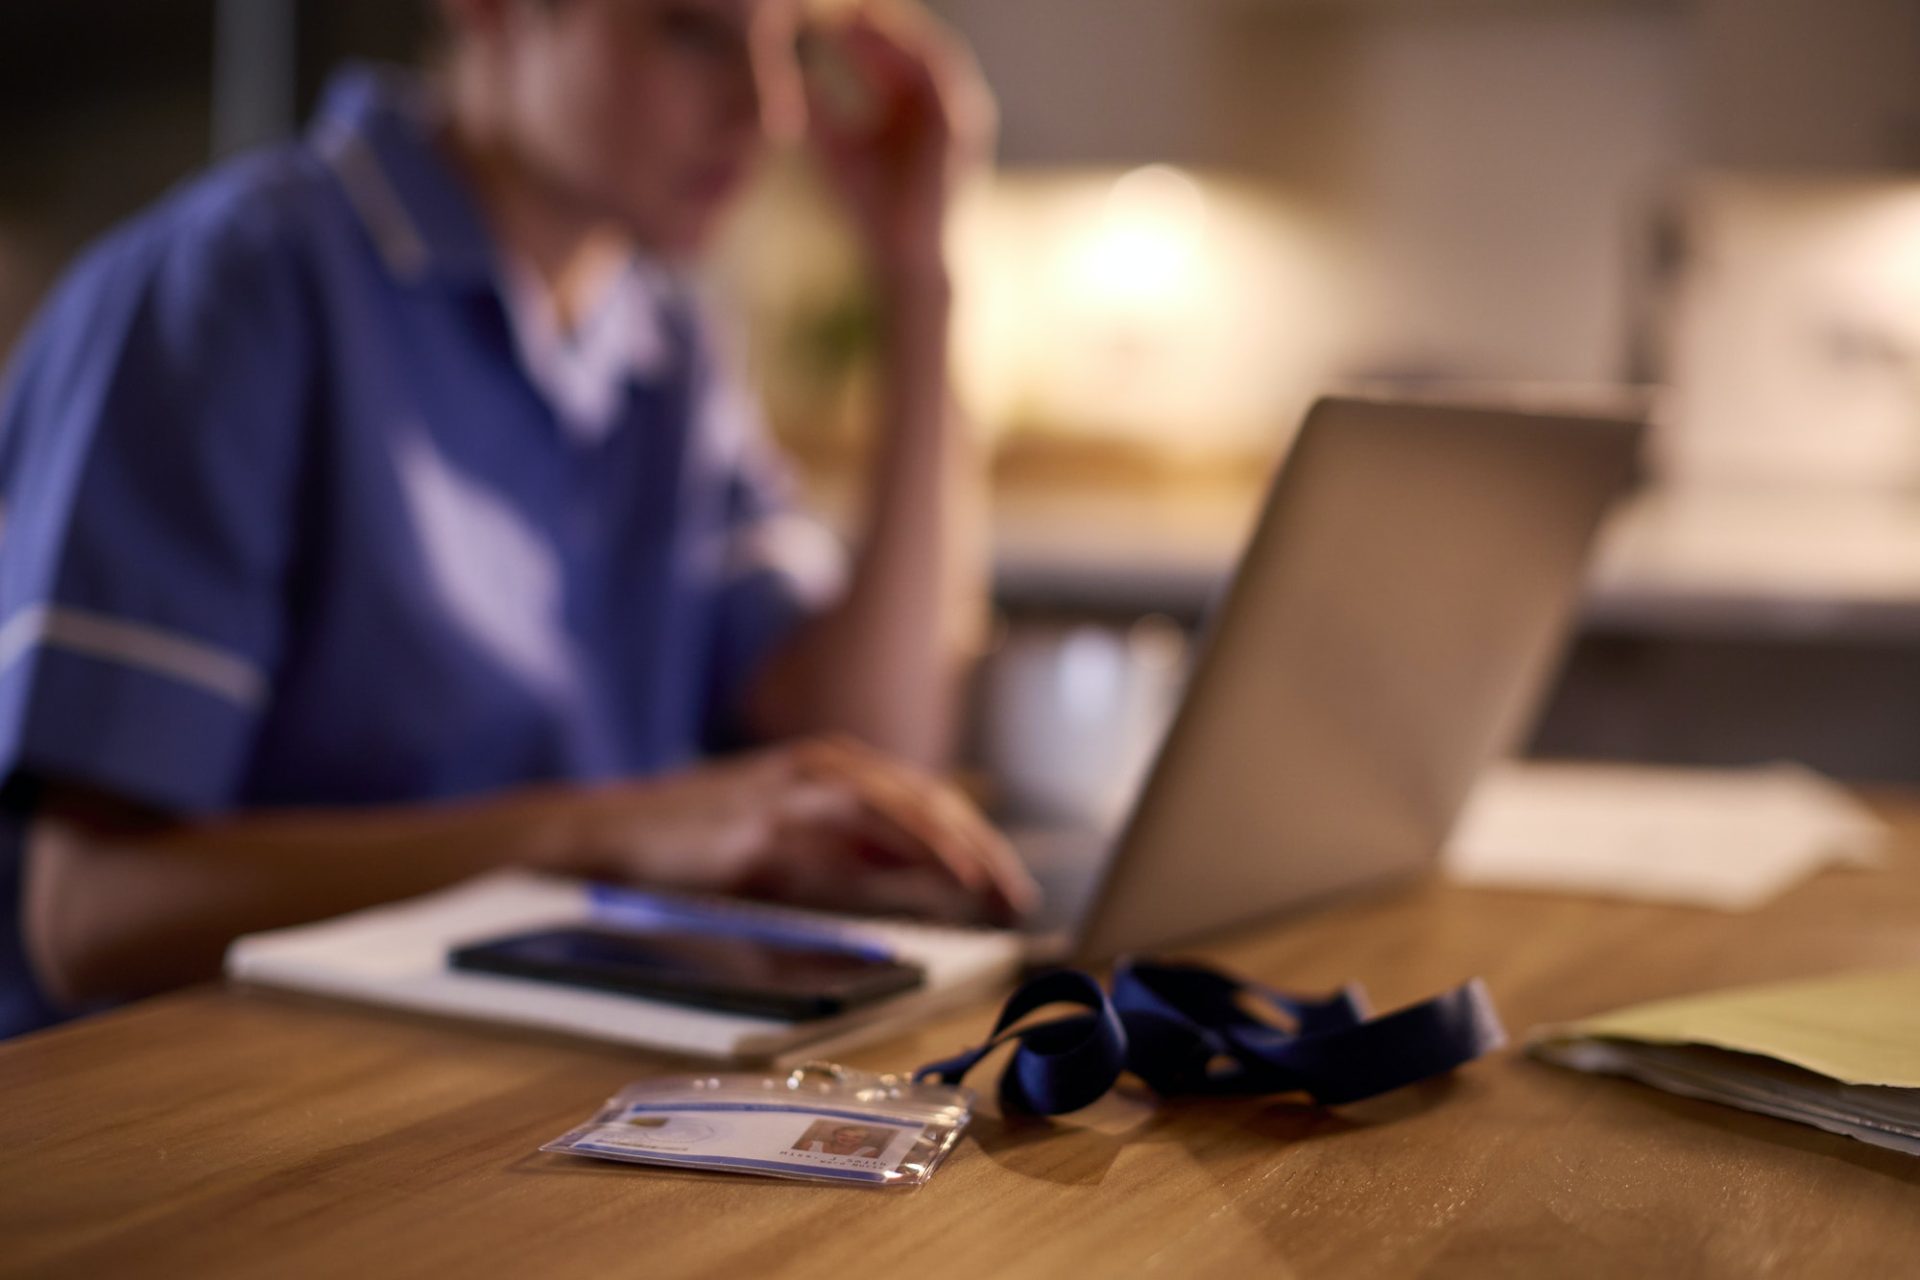 Woman In Medical Uniform Working Or Studying On Laptop At Home At Night With Security ID Lanyard